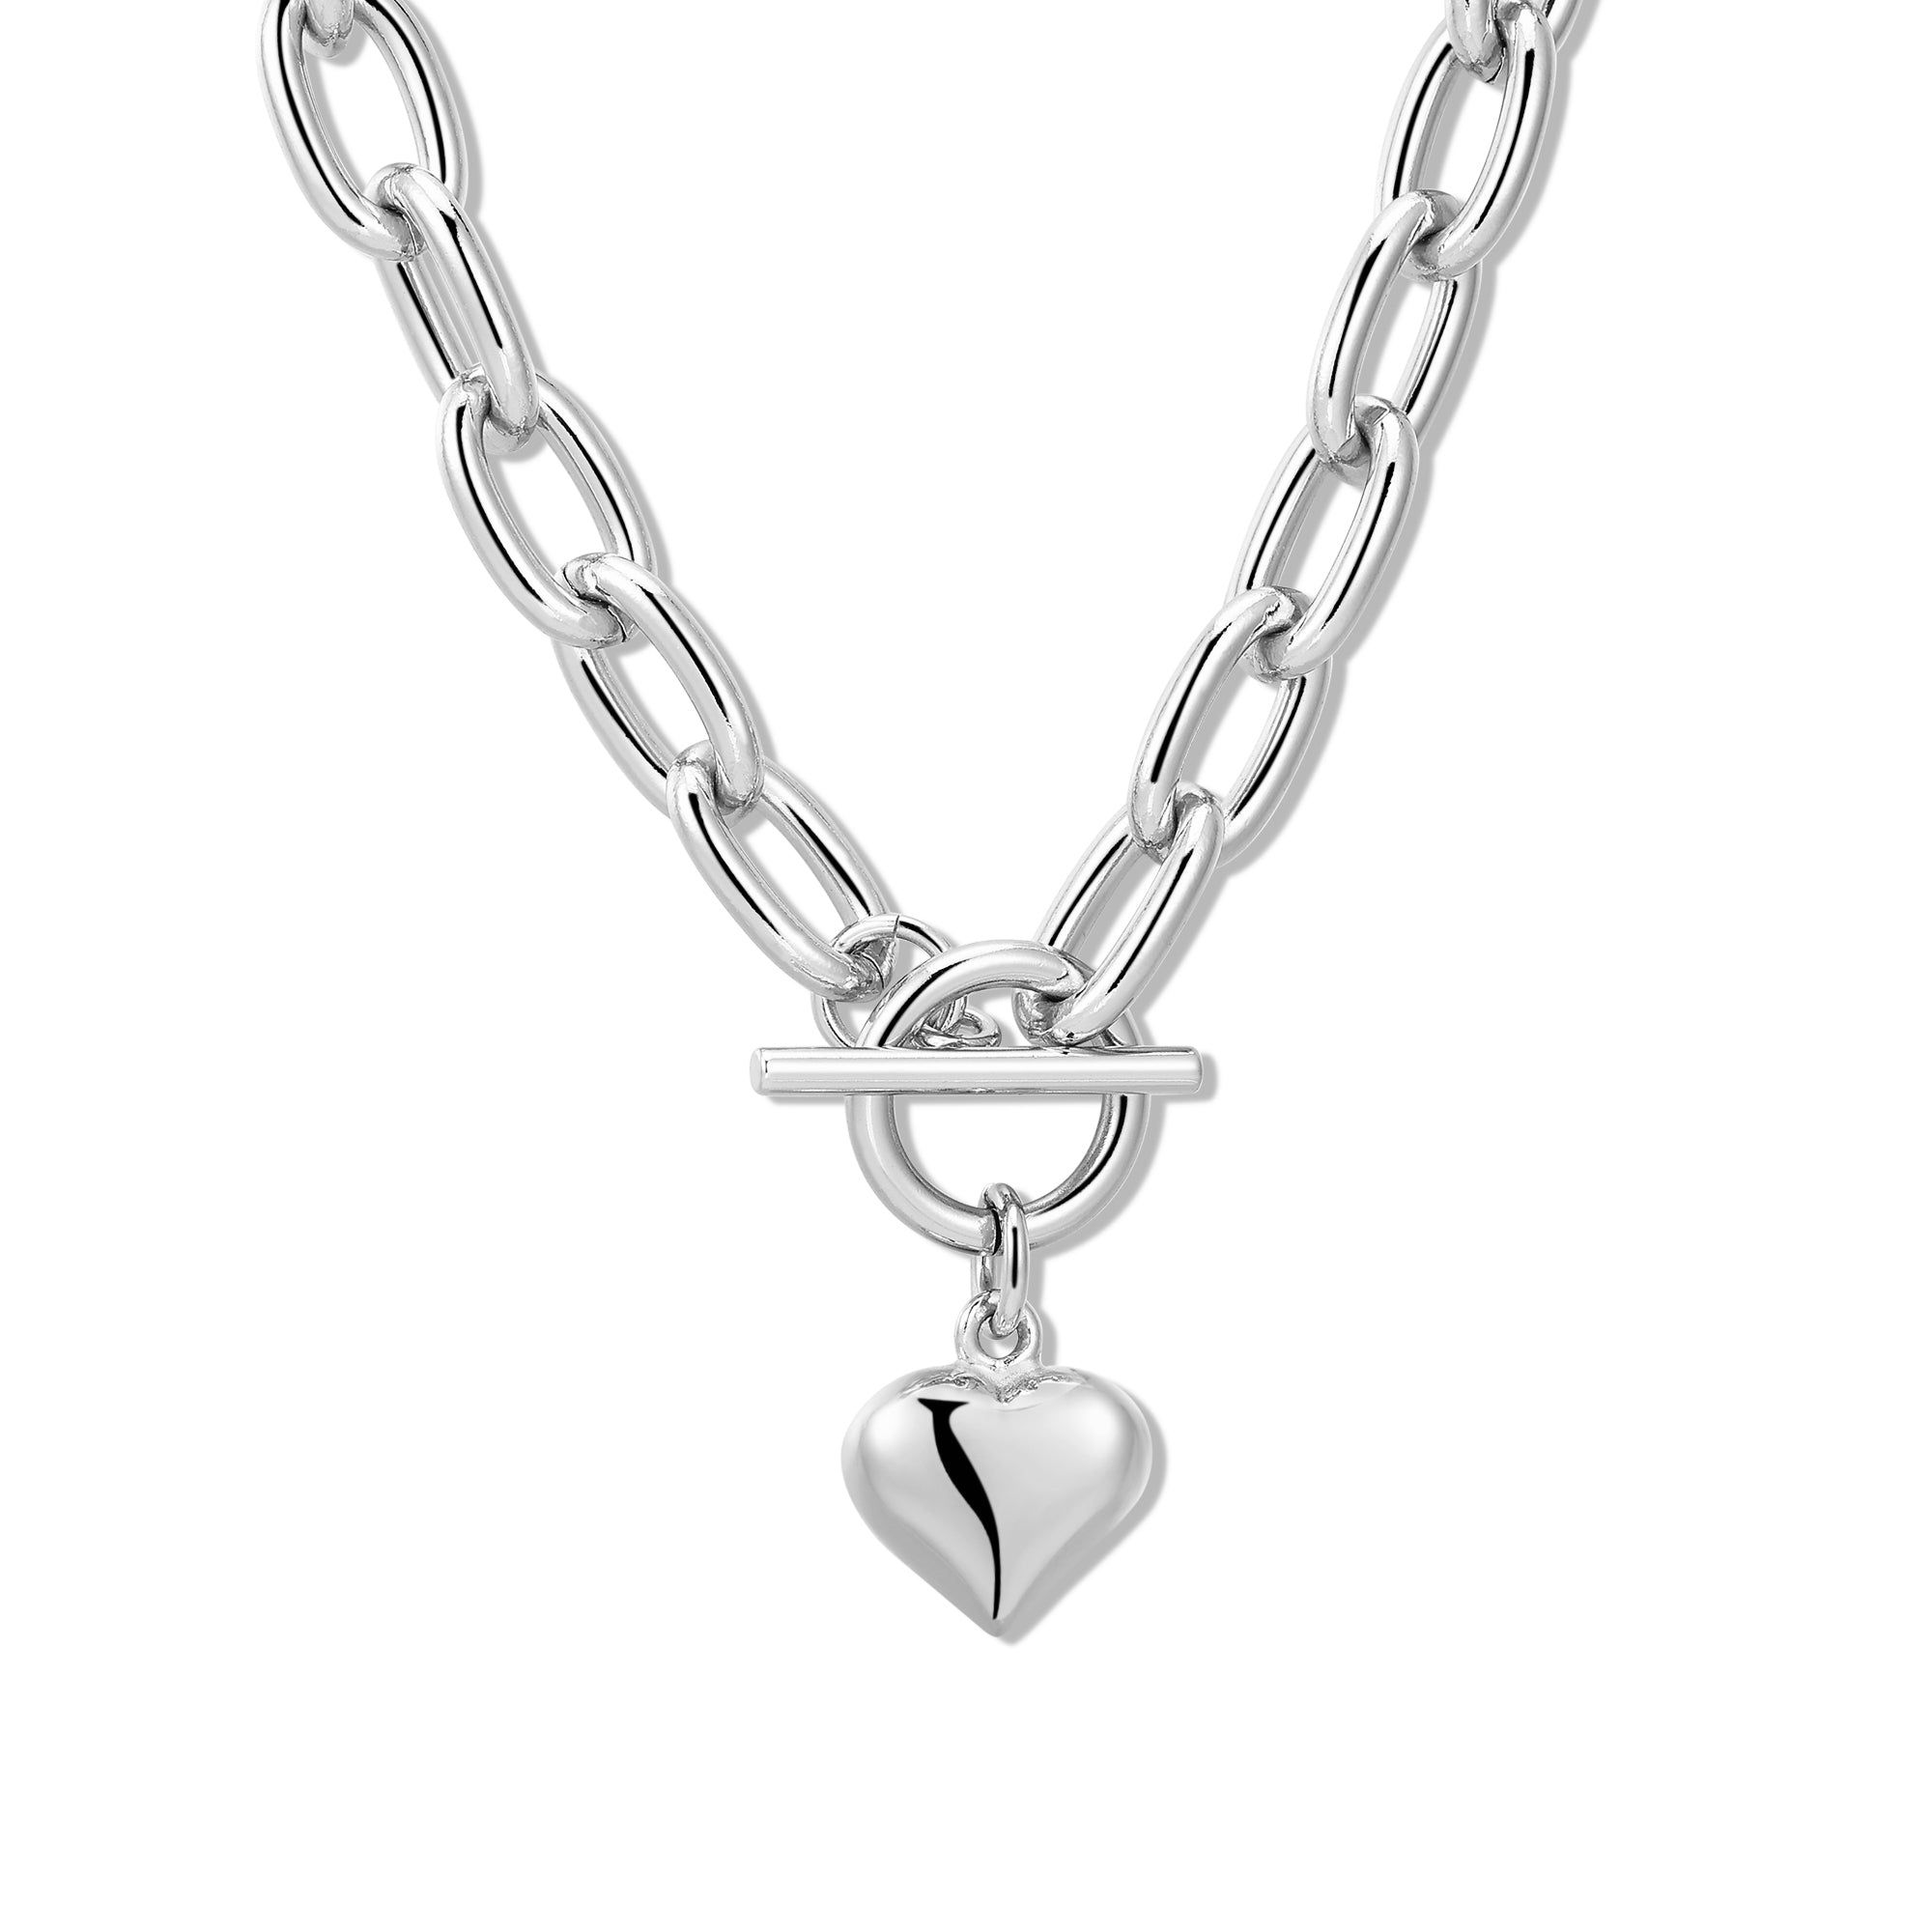 a necklace with a heart charm hanging from it